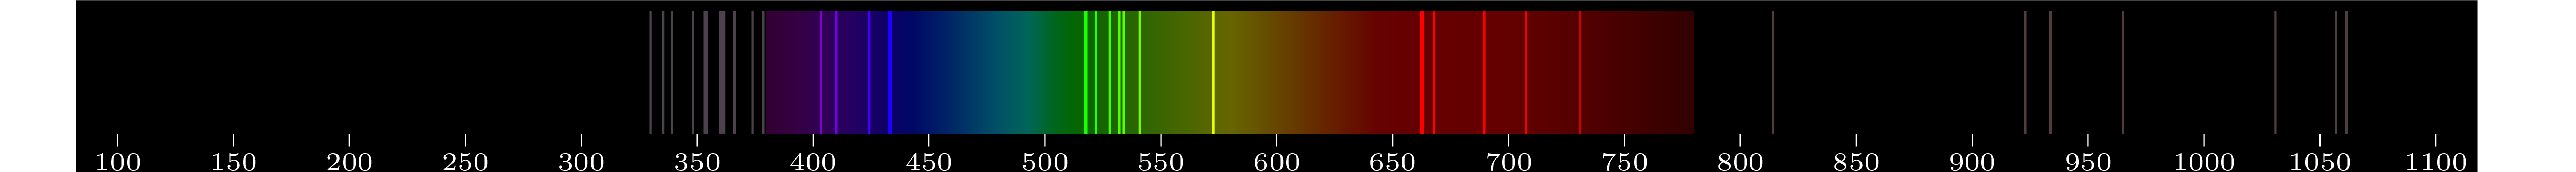 emmision spectra of element Cf